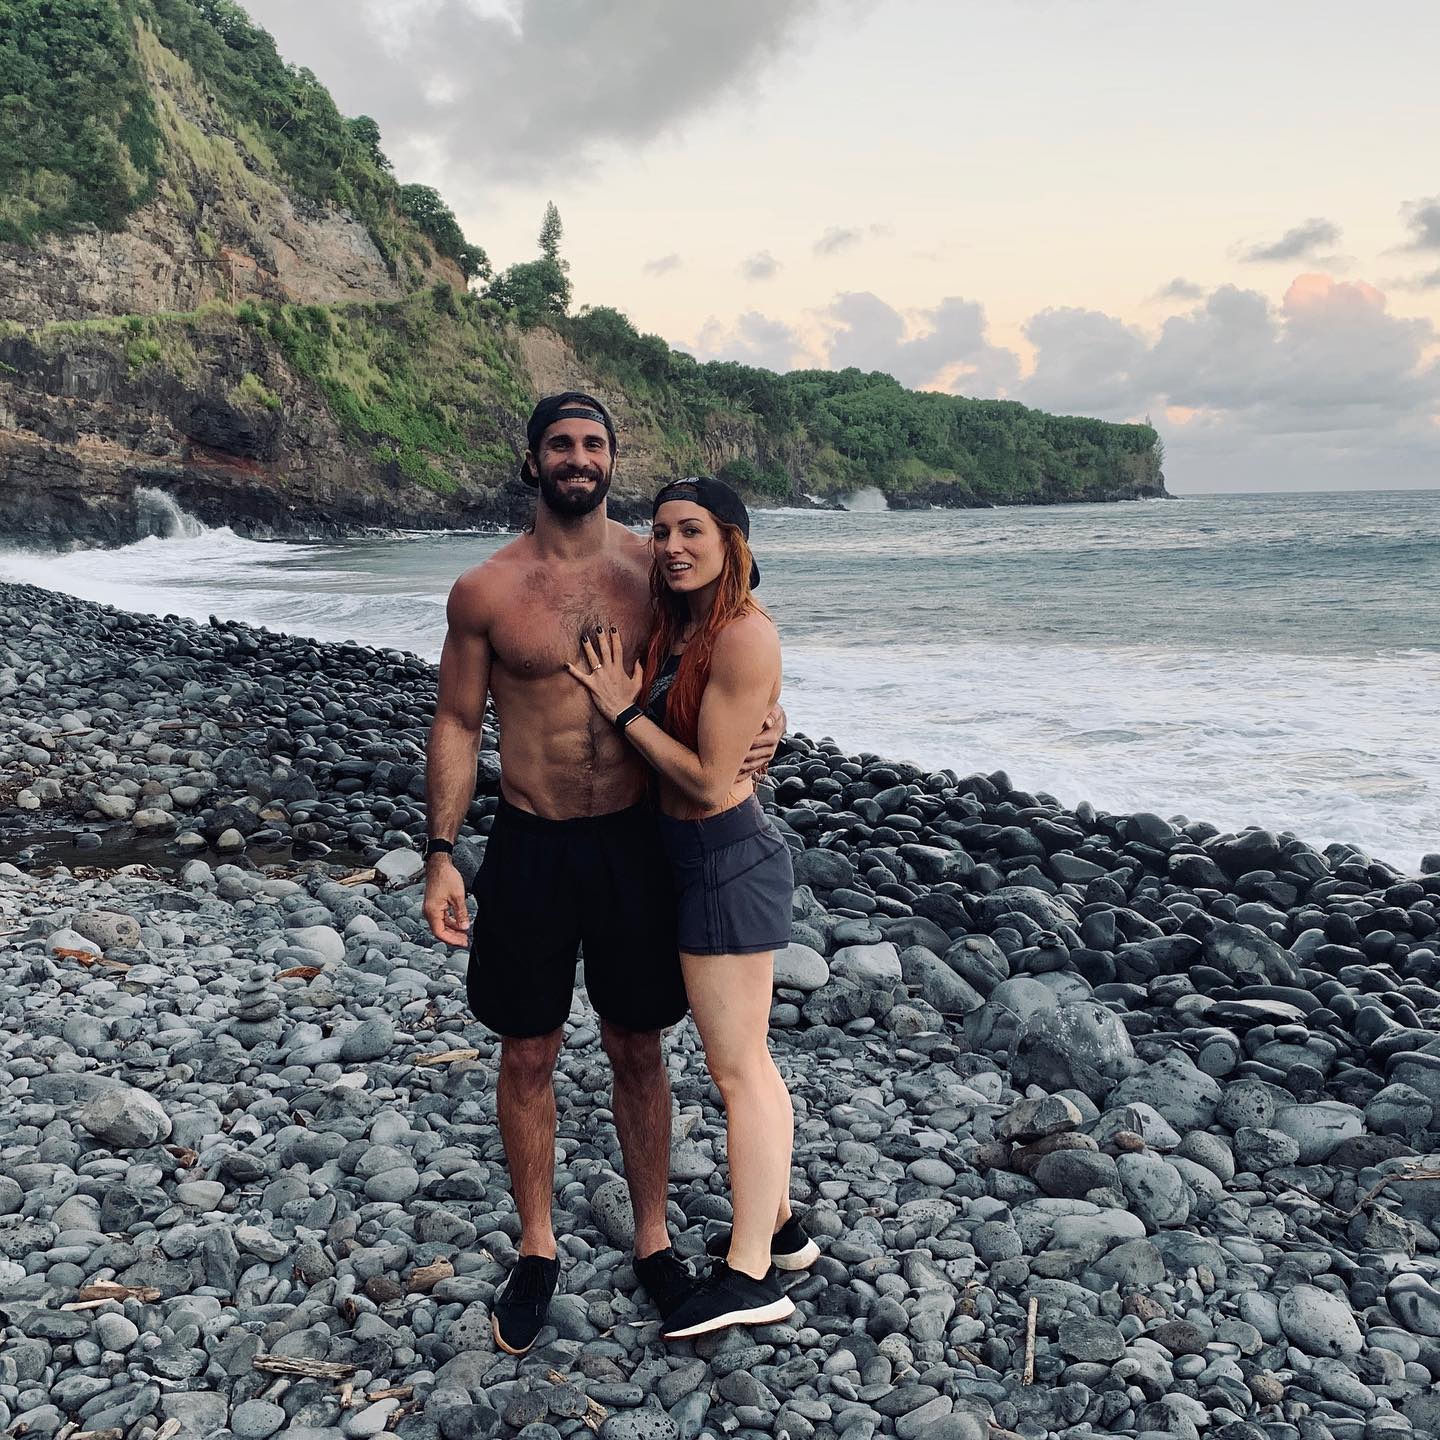 Picture posted by Becky Lynch while announcing her engagement to Seth Rollins